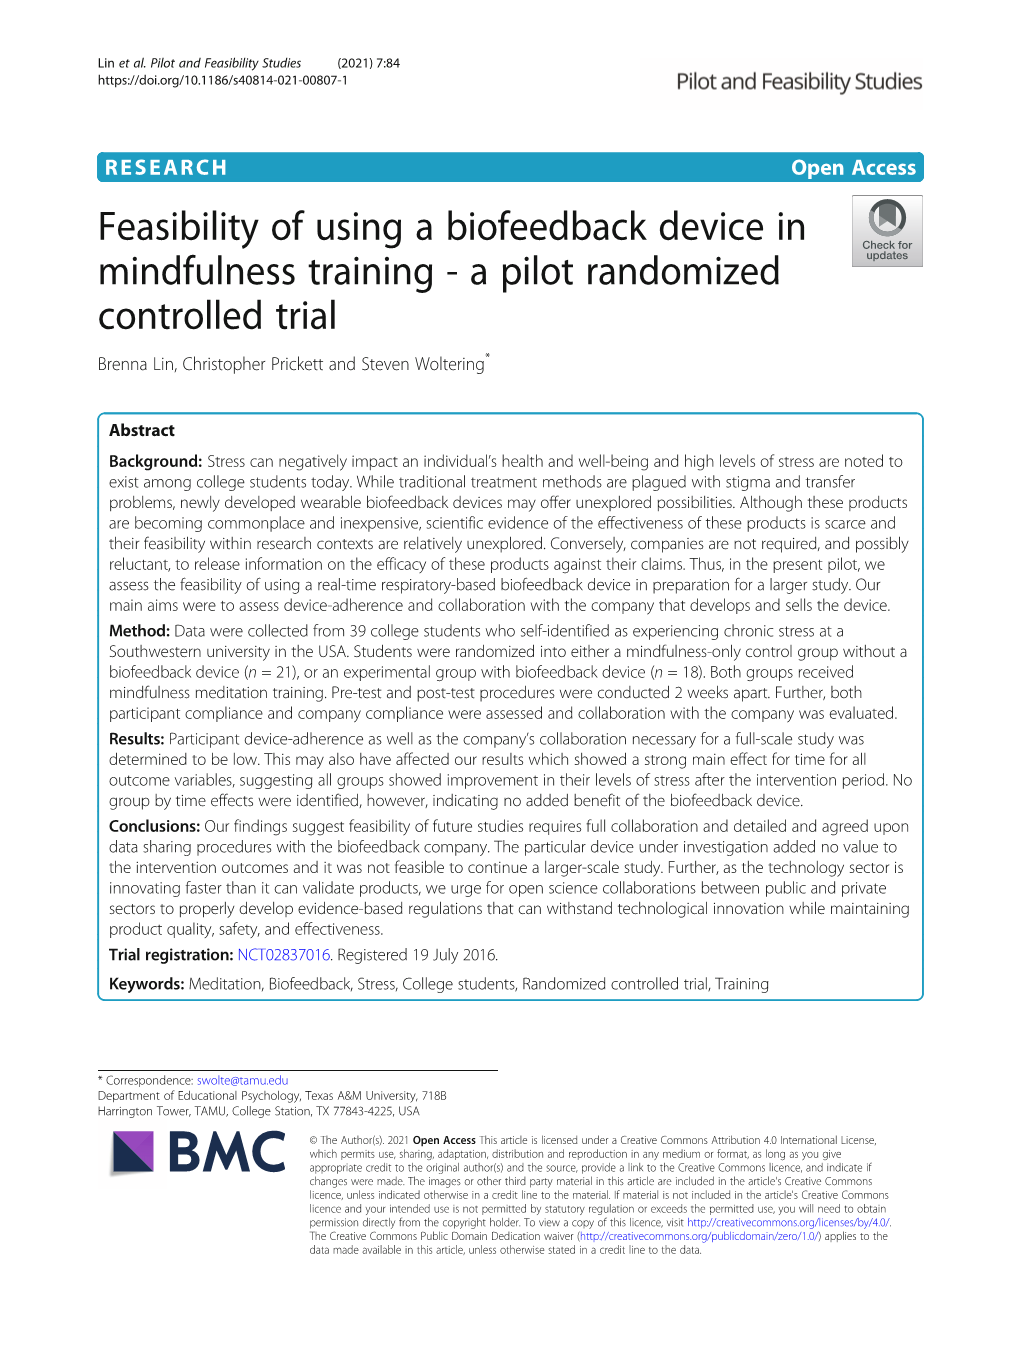 Feasibility of Using a Biofeedback Device in Mindfulness Training - a Pilot Randomized Controlled Trial Brenna Lin, Christopher Prickett and Steven Woltering*